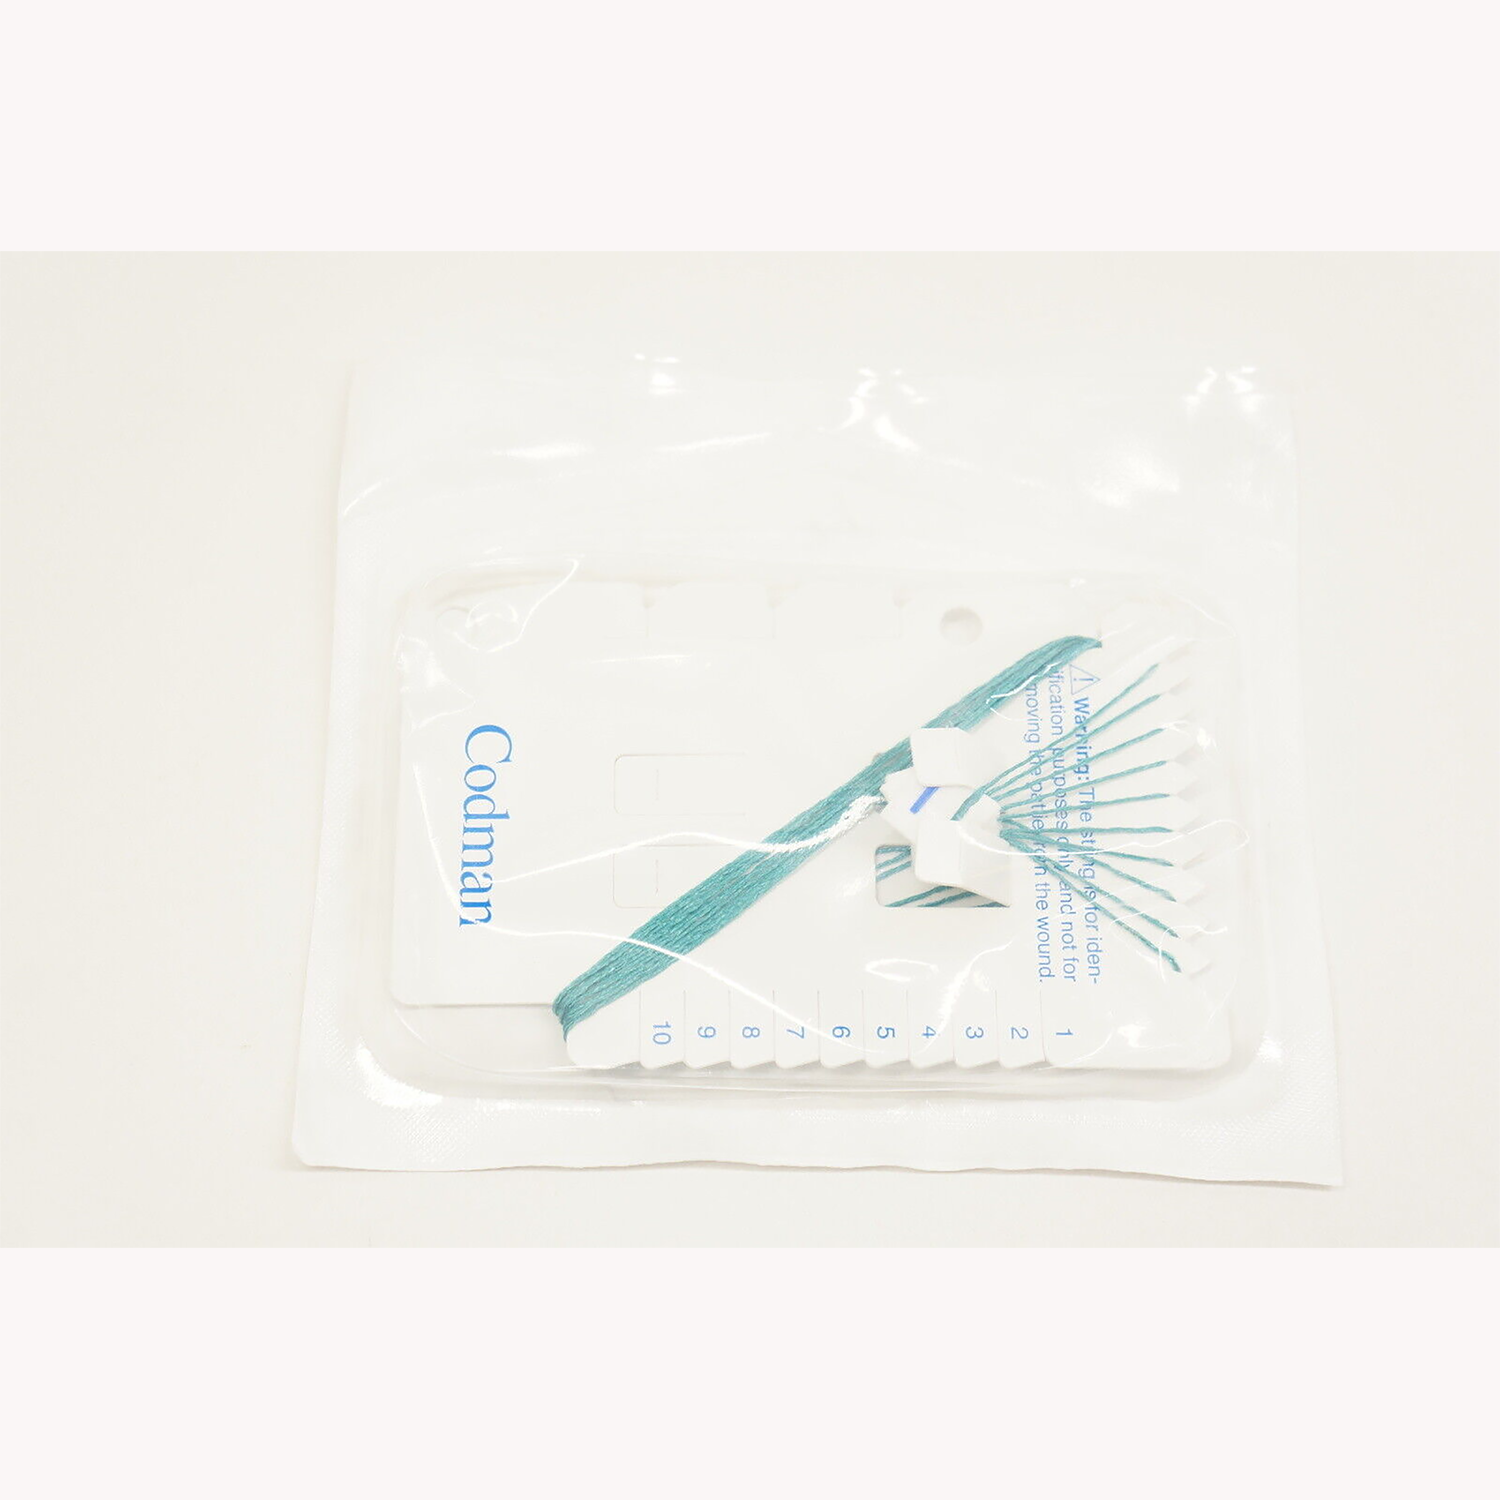 Codman Surgical Patties | 1.27 x 1.27cm | Pack of 200 (20 Packages per Dispenser Box x 10 Boxes) (1)